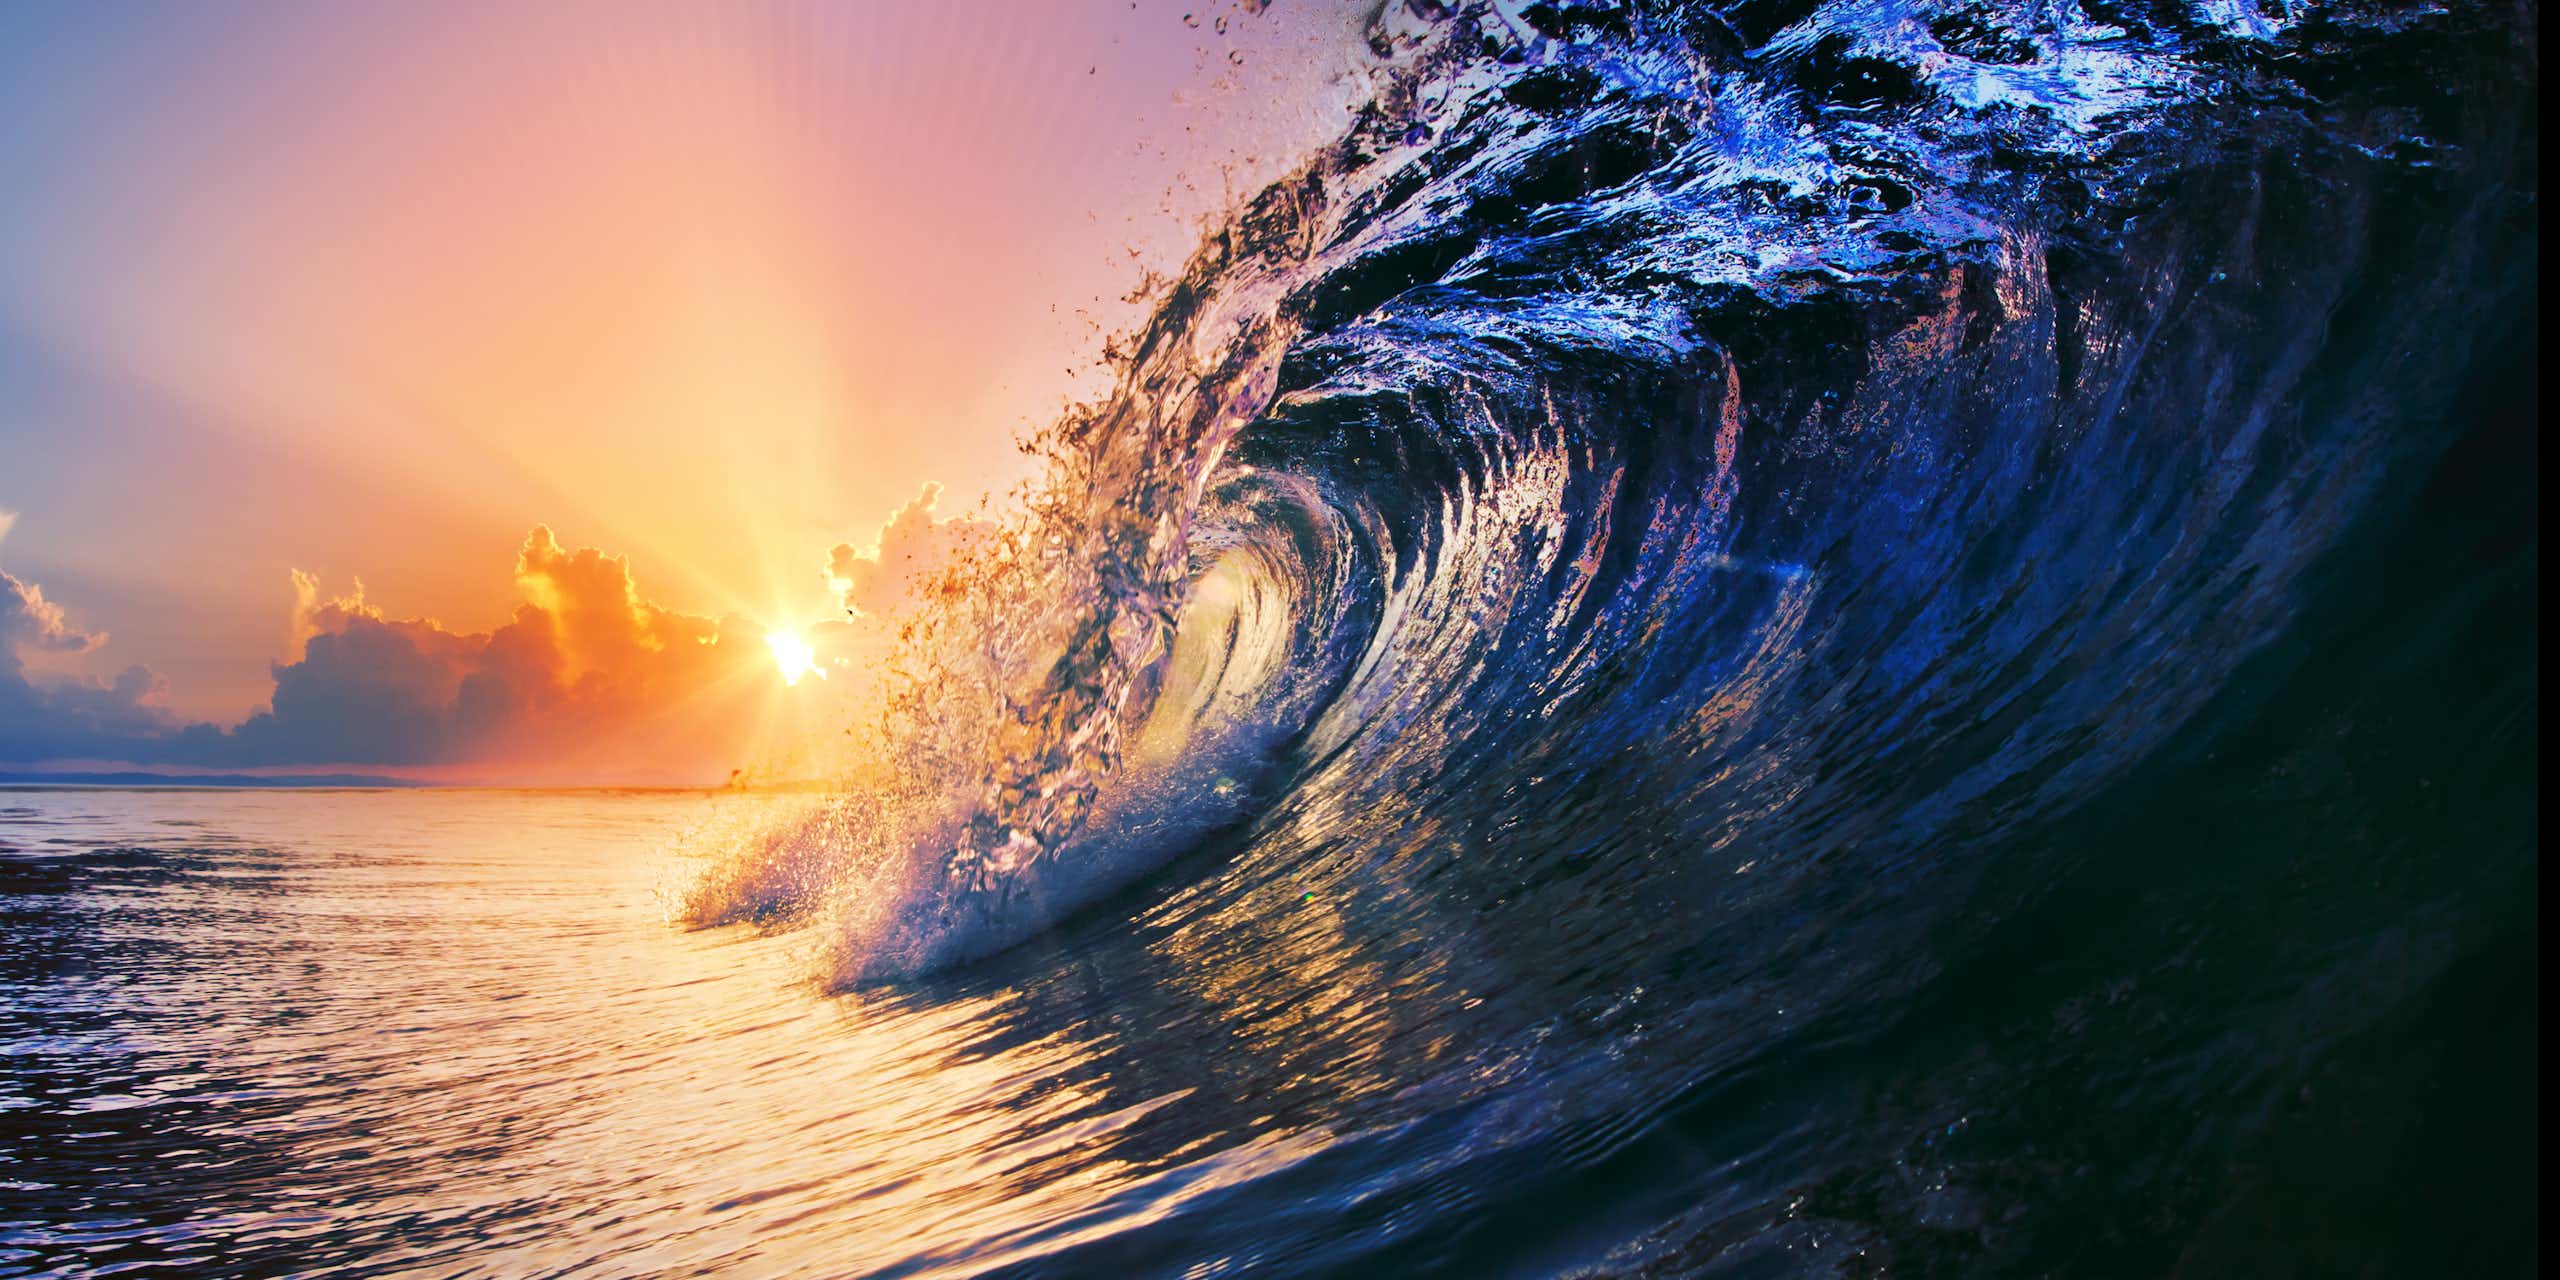 Low angle view of an ocean wave breaking with a pastel sunset in the background.